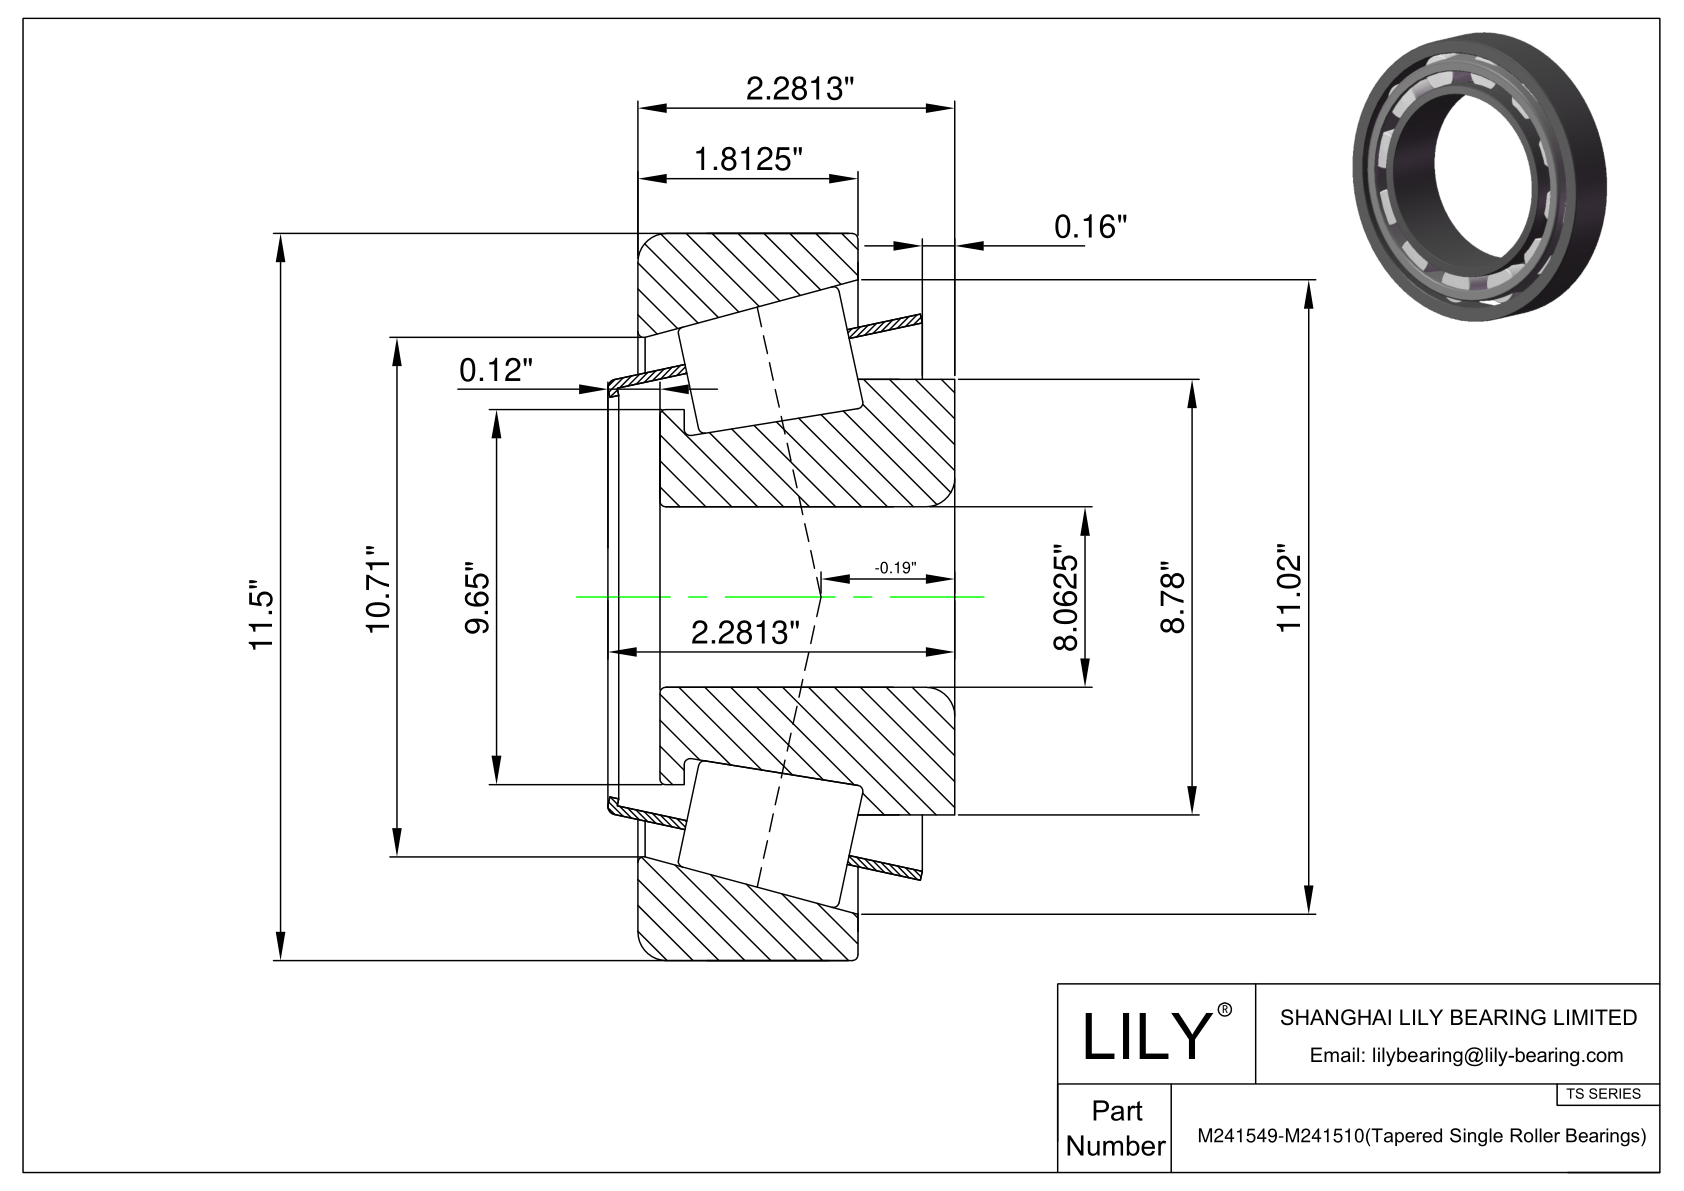 M241549-M241510 TS (Tapered Single Roller Bearings) (Imperial) cad drawing